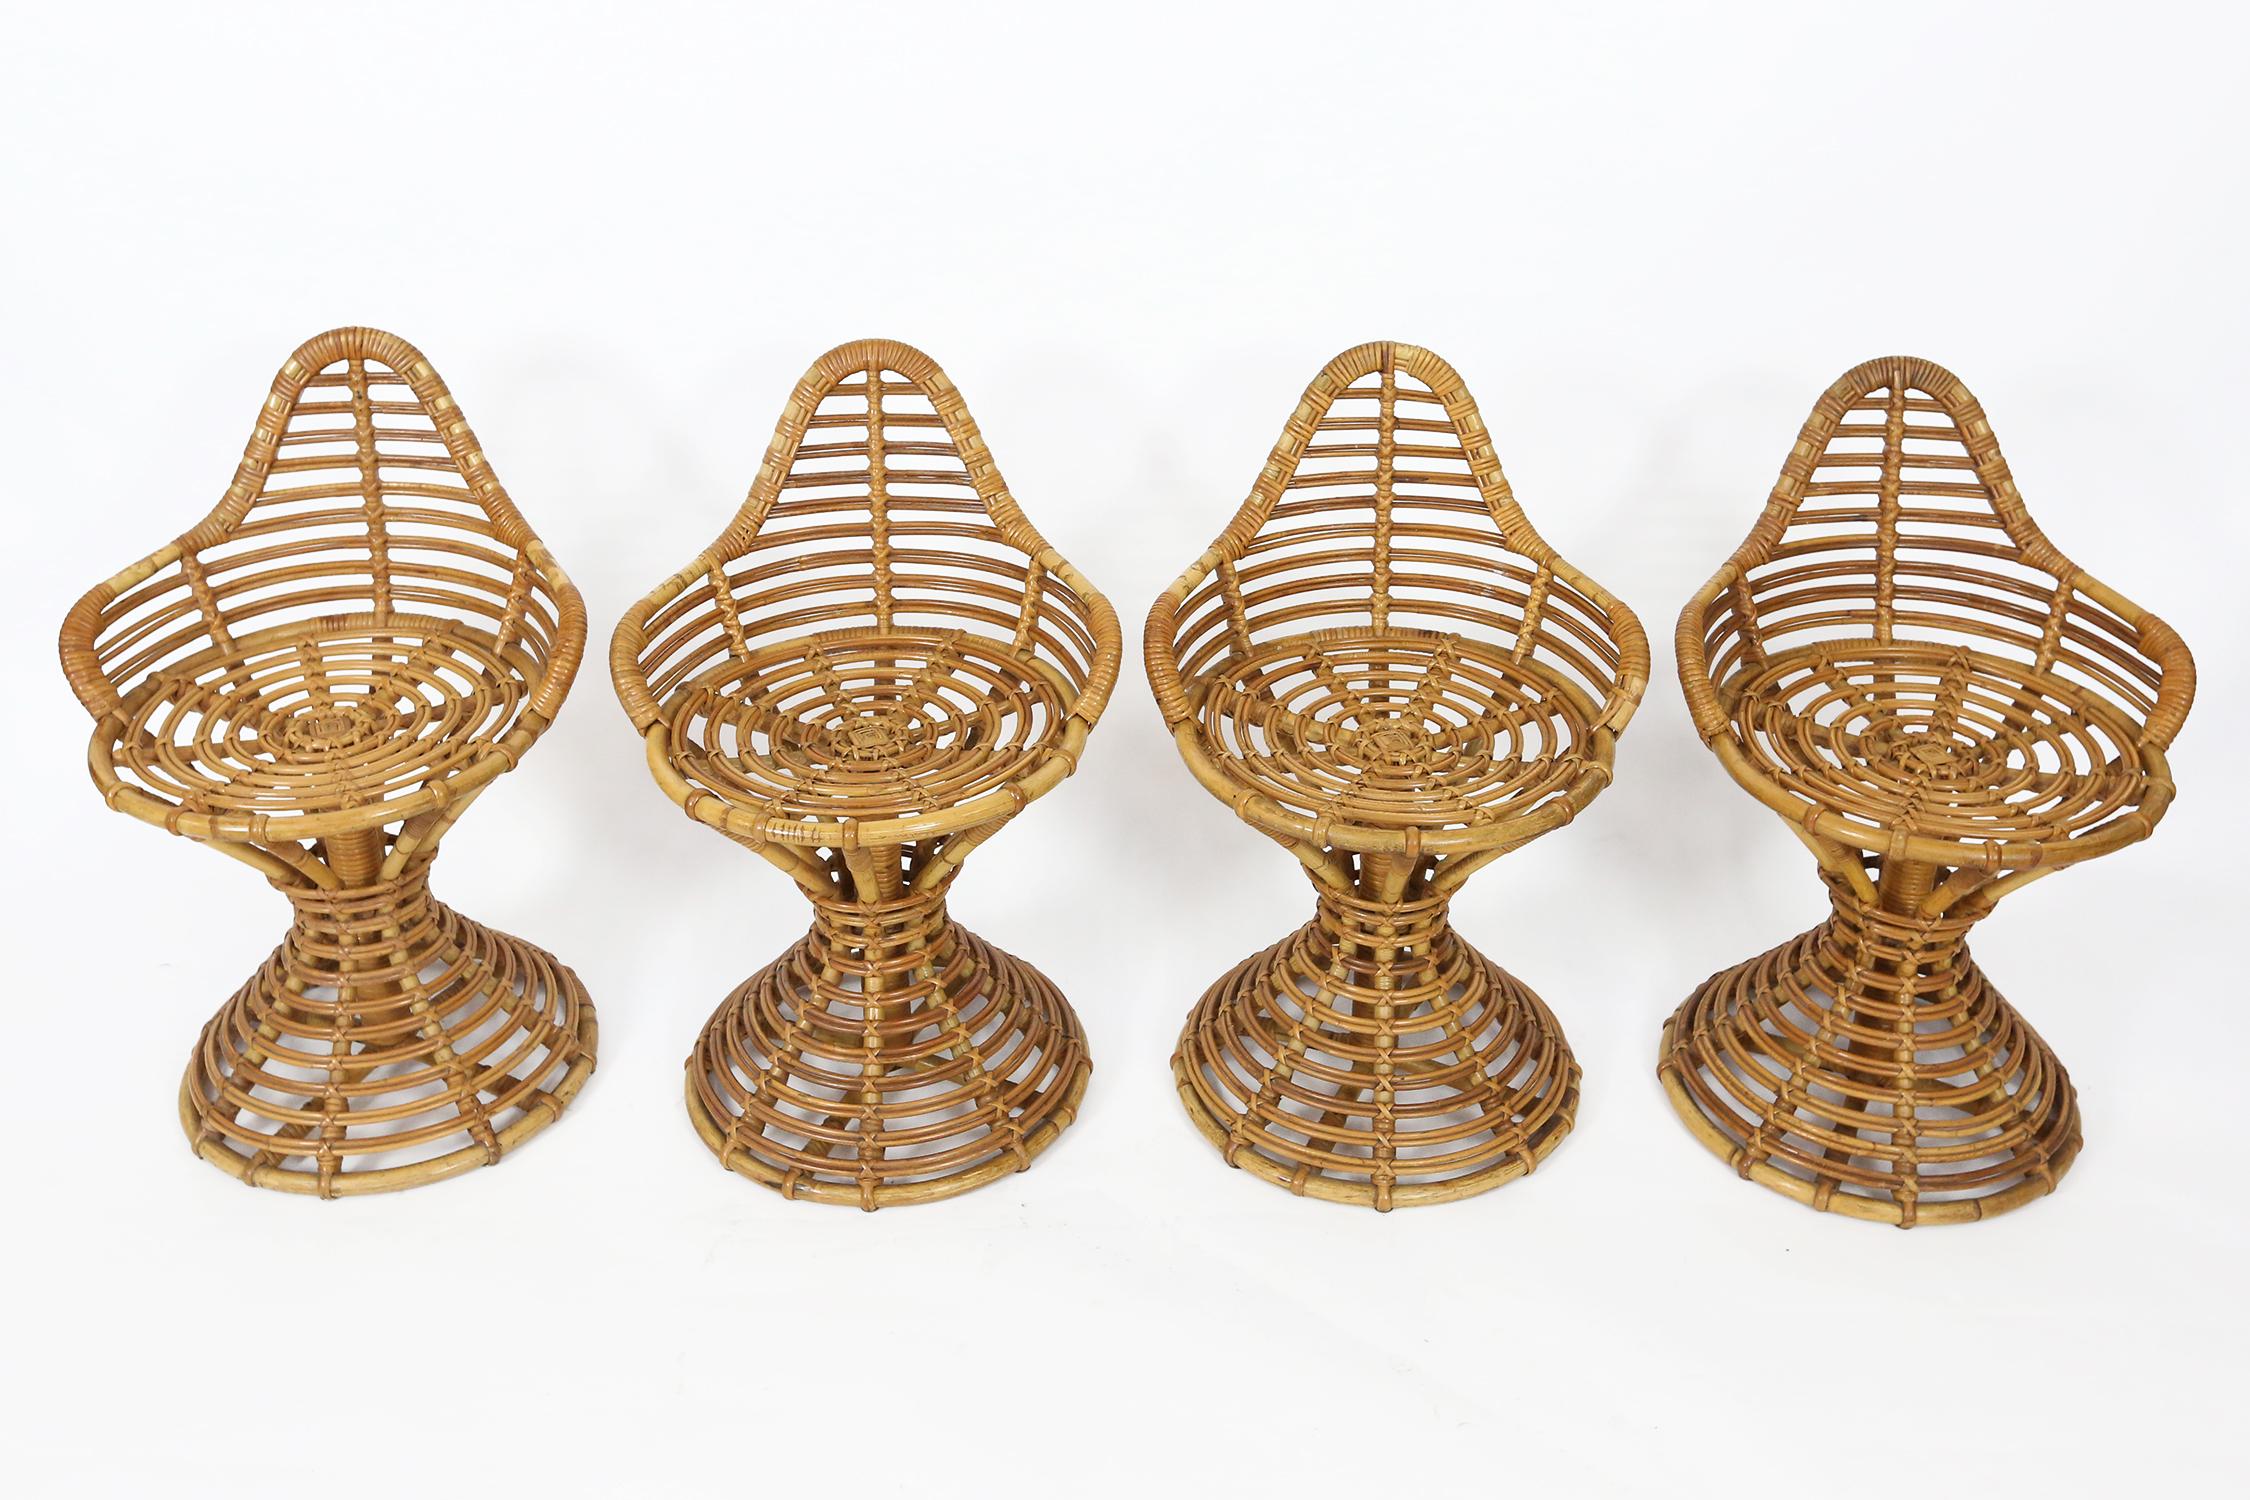 Rare set of 4 rattan stools or side chairs, designed by Danish designer Mary Beatrice Bloch in 1959 and manufactured by Copenhagen based Robert Wengler.
The stools are in great condition, each stool has a metal manufacturer label on the underside